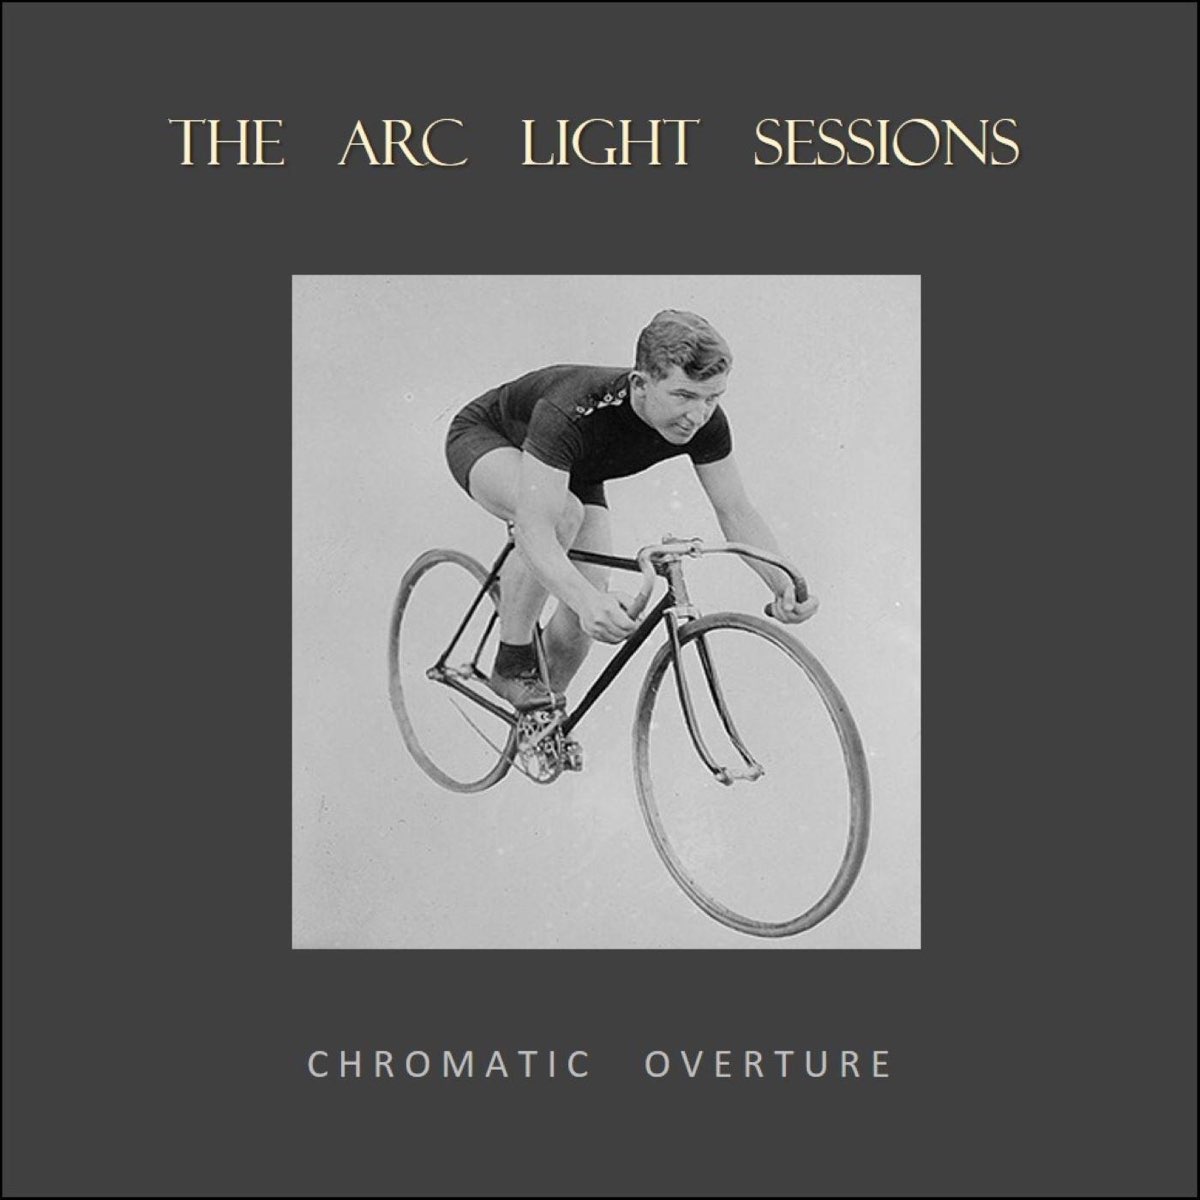 Light sessions. The Arc Light sessions_2020_the Discovery of Light. The Arc Light sessions - 2020 - Chromatic Overture. The Arc Light sessions - 2022 - of thoughts and other misgivings. Arc light